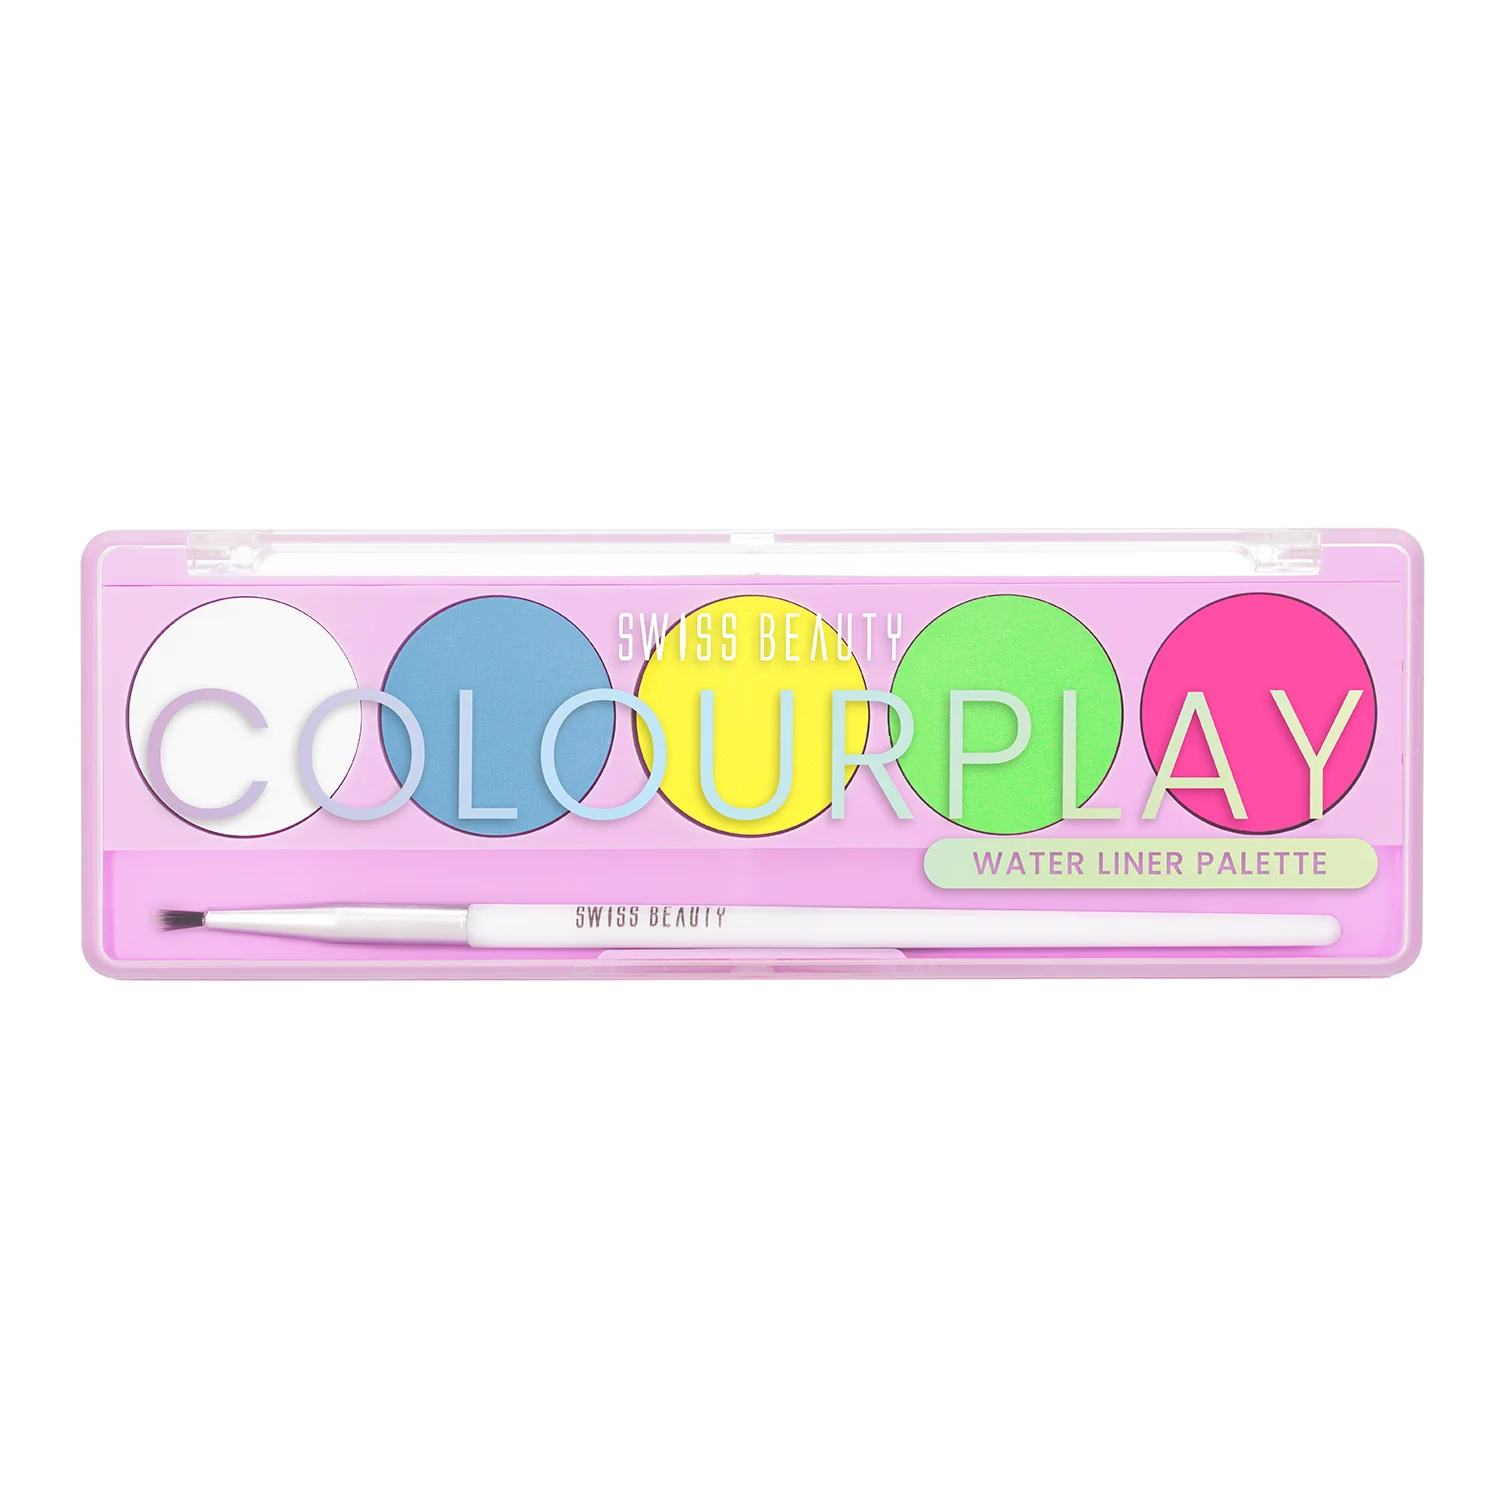 Swiss beauty colour play water liner palette